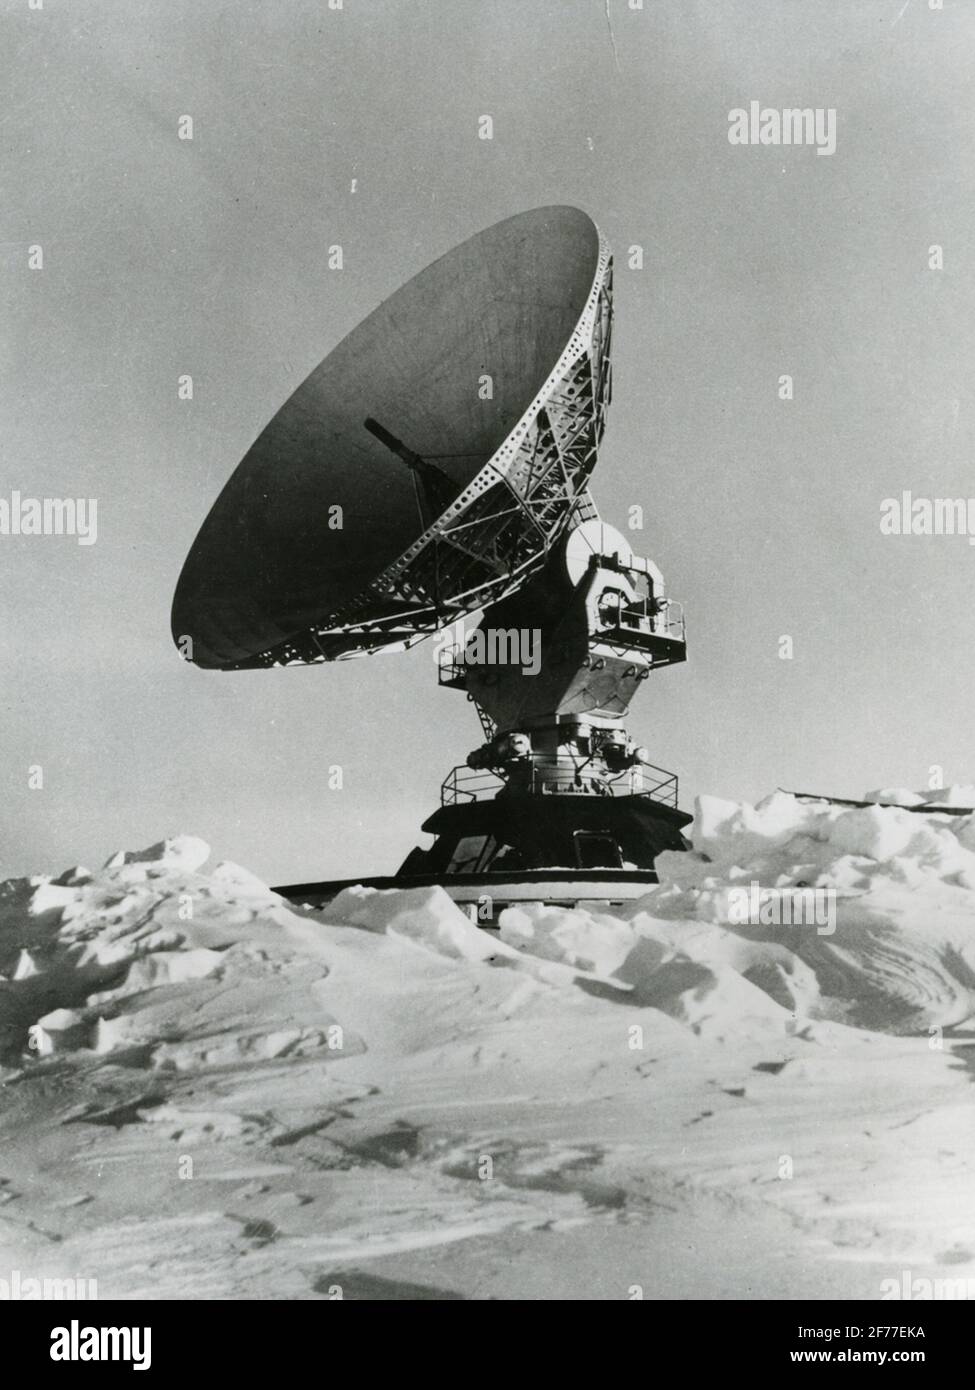 The reception and transmission station Orbita. Which received signals from  the satellites in the Millija series and sent them to transmitter stations  for Radio and TV. In the then Soviet Union, there